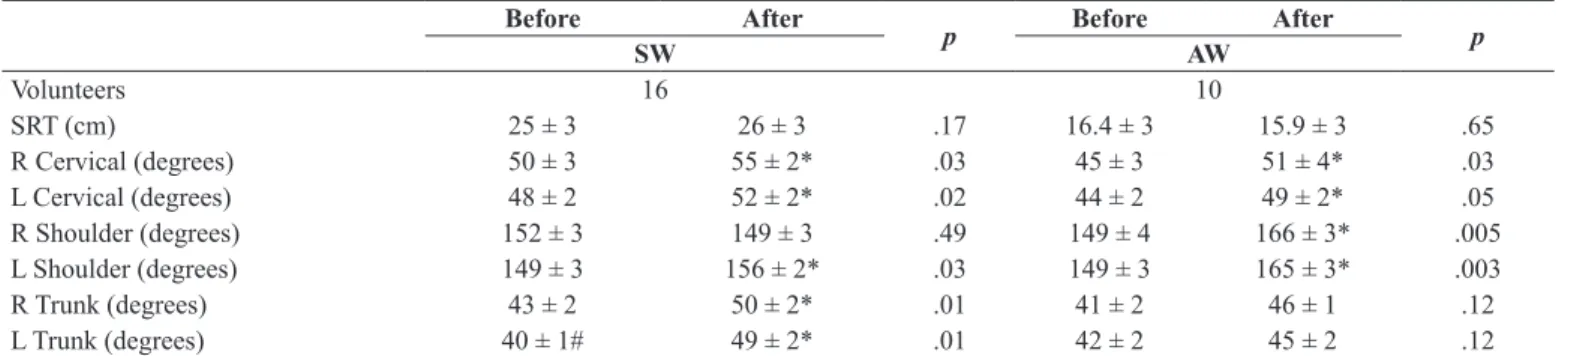 Table 5. Flexibility before and after the 6-month stretch break program. Before After p Before After SW AW p Volunteers 16 10 SRT (cm) 25 ± 3 26 ± 3 .17 16.4 ± 3 15.9 ± 3 .65 R Cervical (degrees) 50 ± 3 55 ± 2* .03 45 ± 3 51 ± 4* .03 L Cervical (degrees) 4